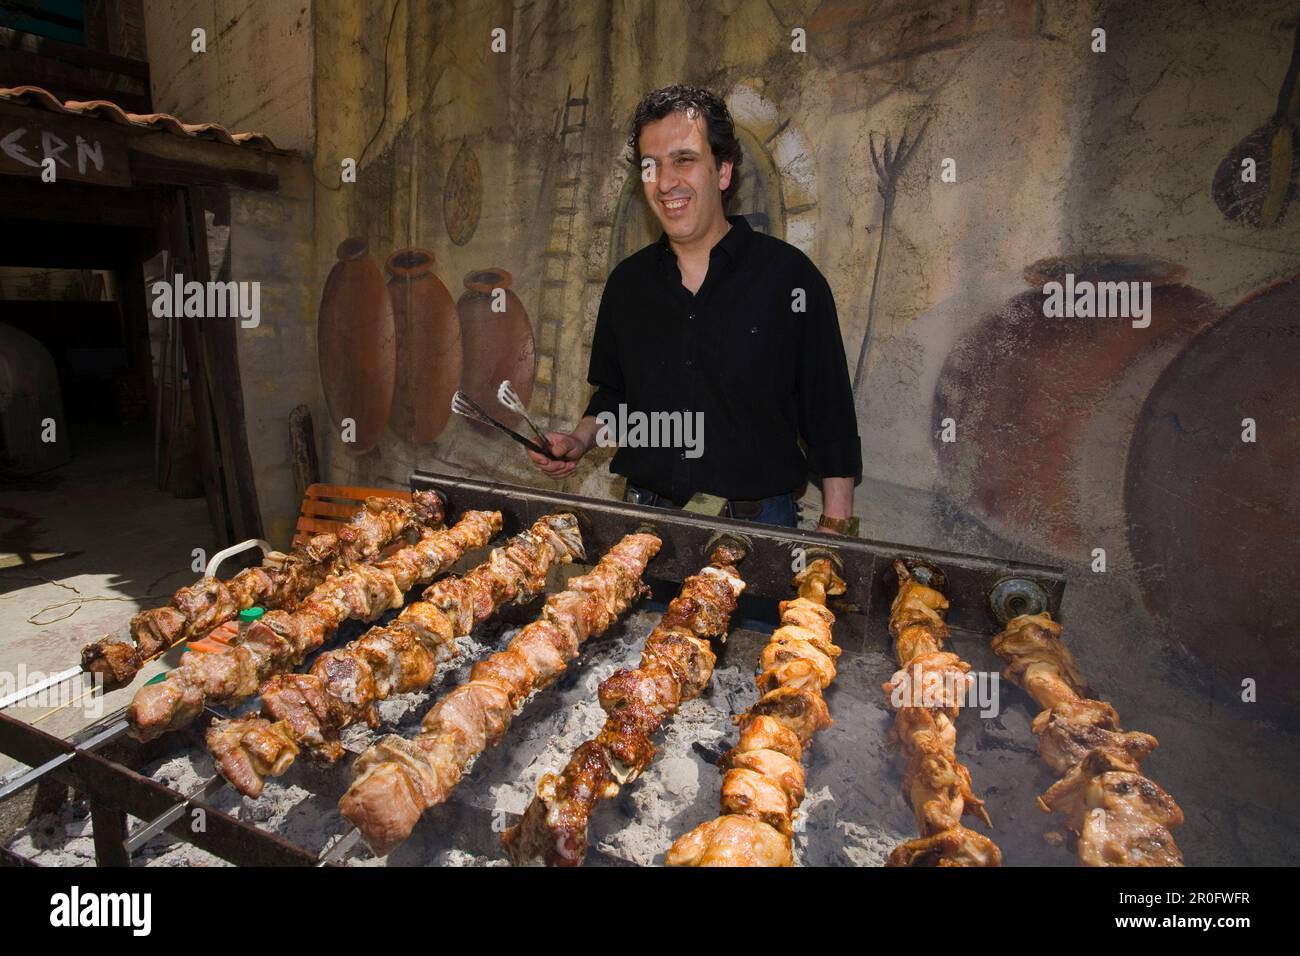 Agis Jacovides, managing director, at a charcoal grill full of quails, The Village Tavern, Pano Platres, South Cyprus, Cyprus Stock Photo